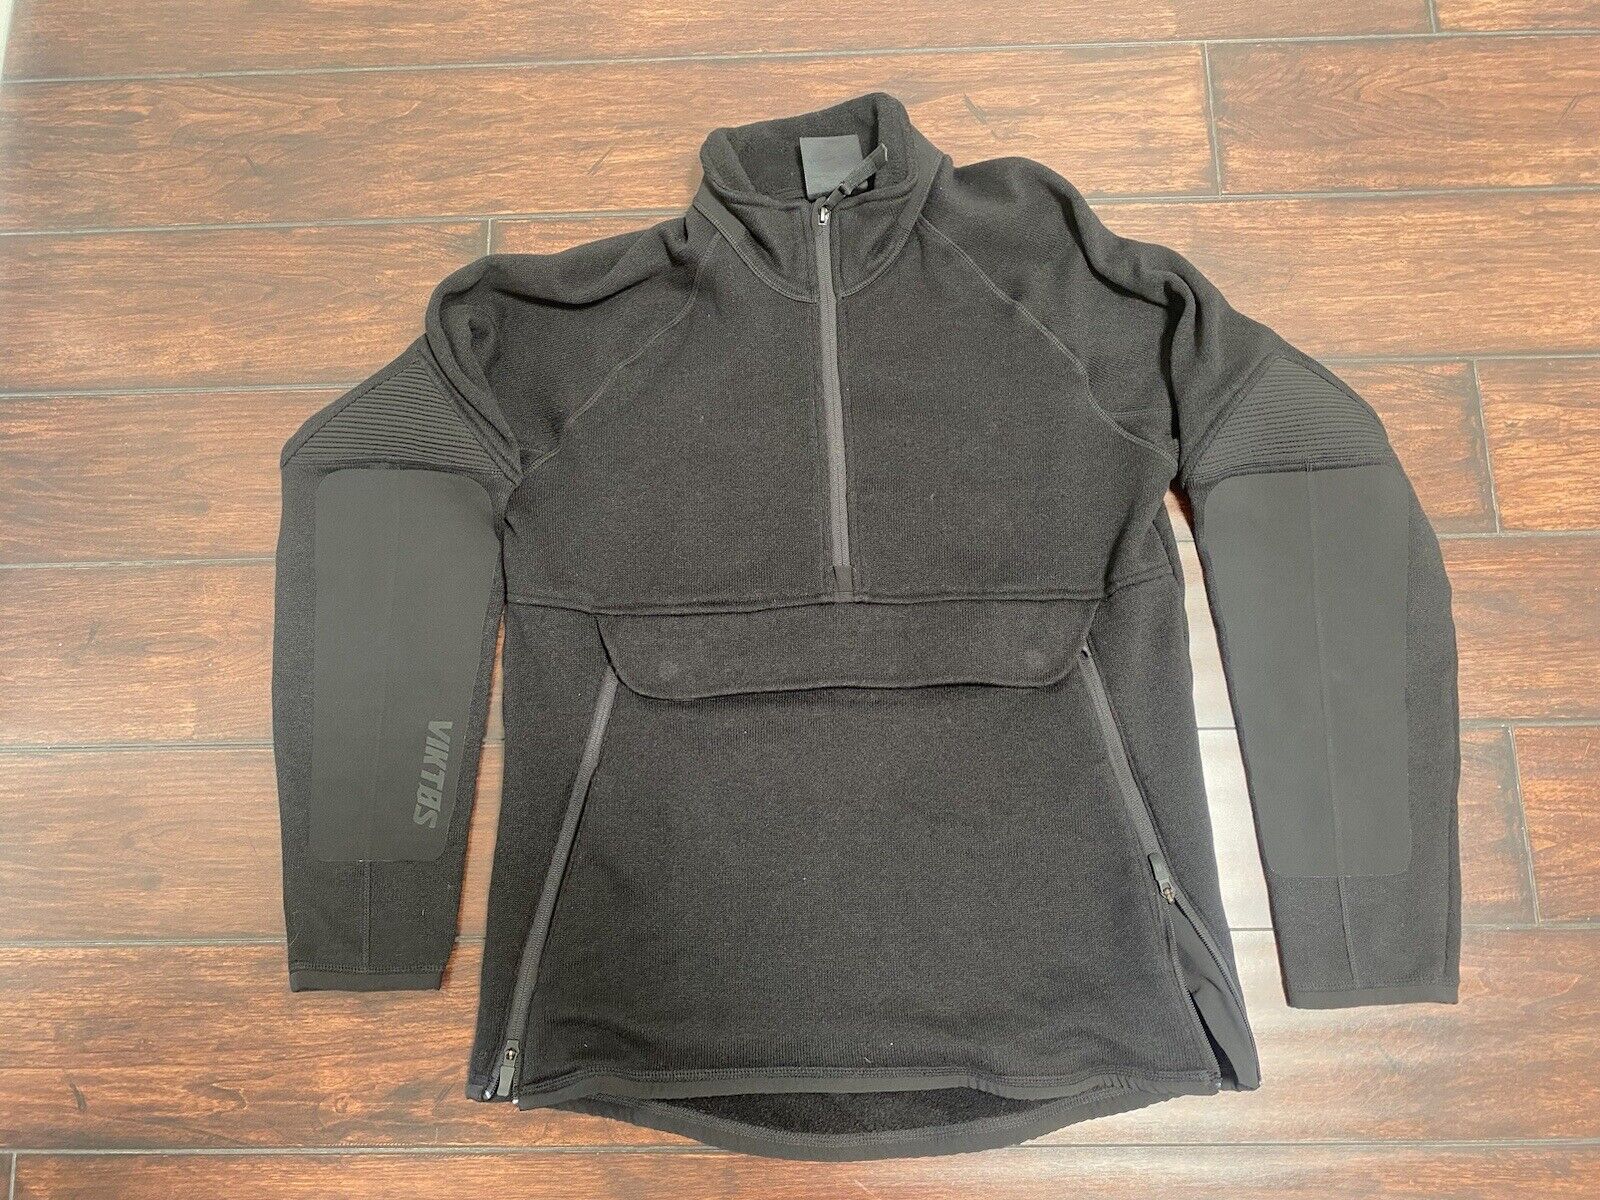 Viktos Gunfighter Tactical Sweater Black SMALL Military 